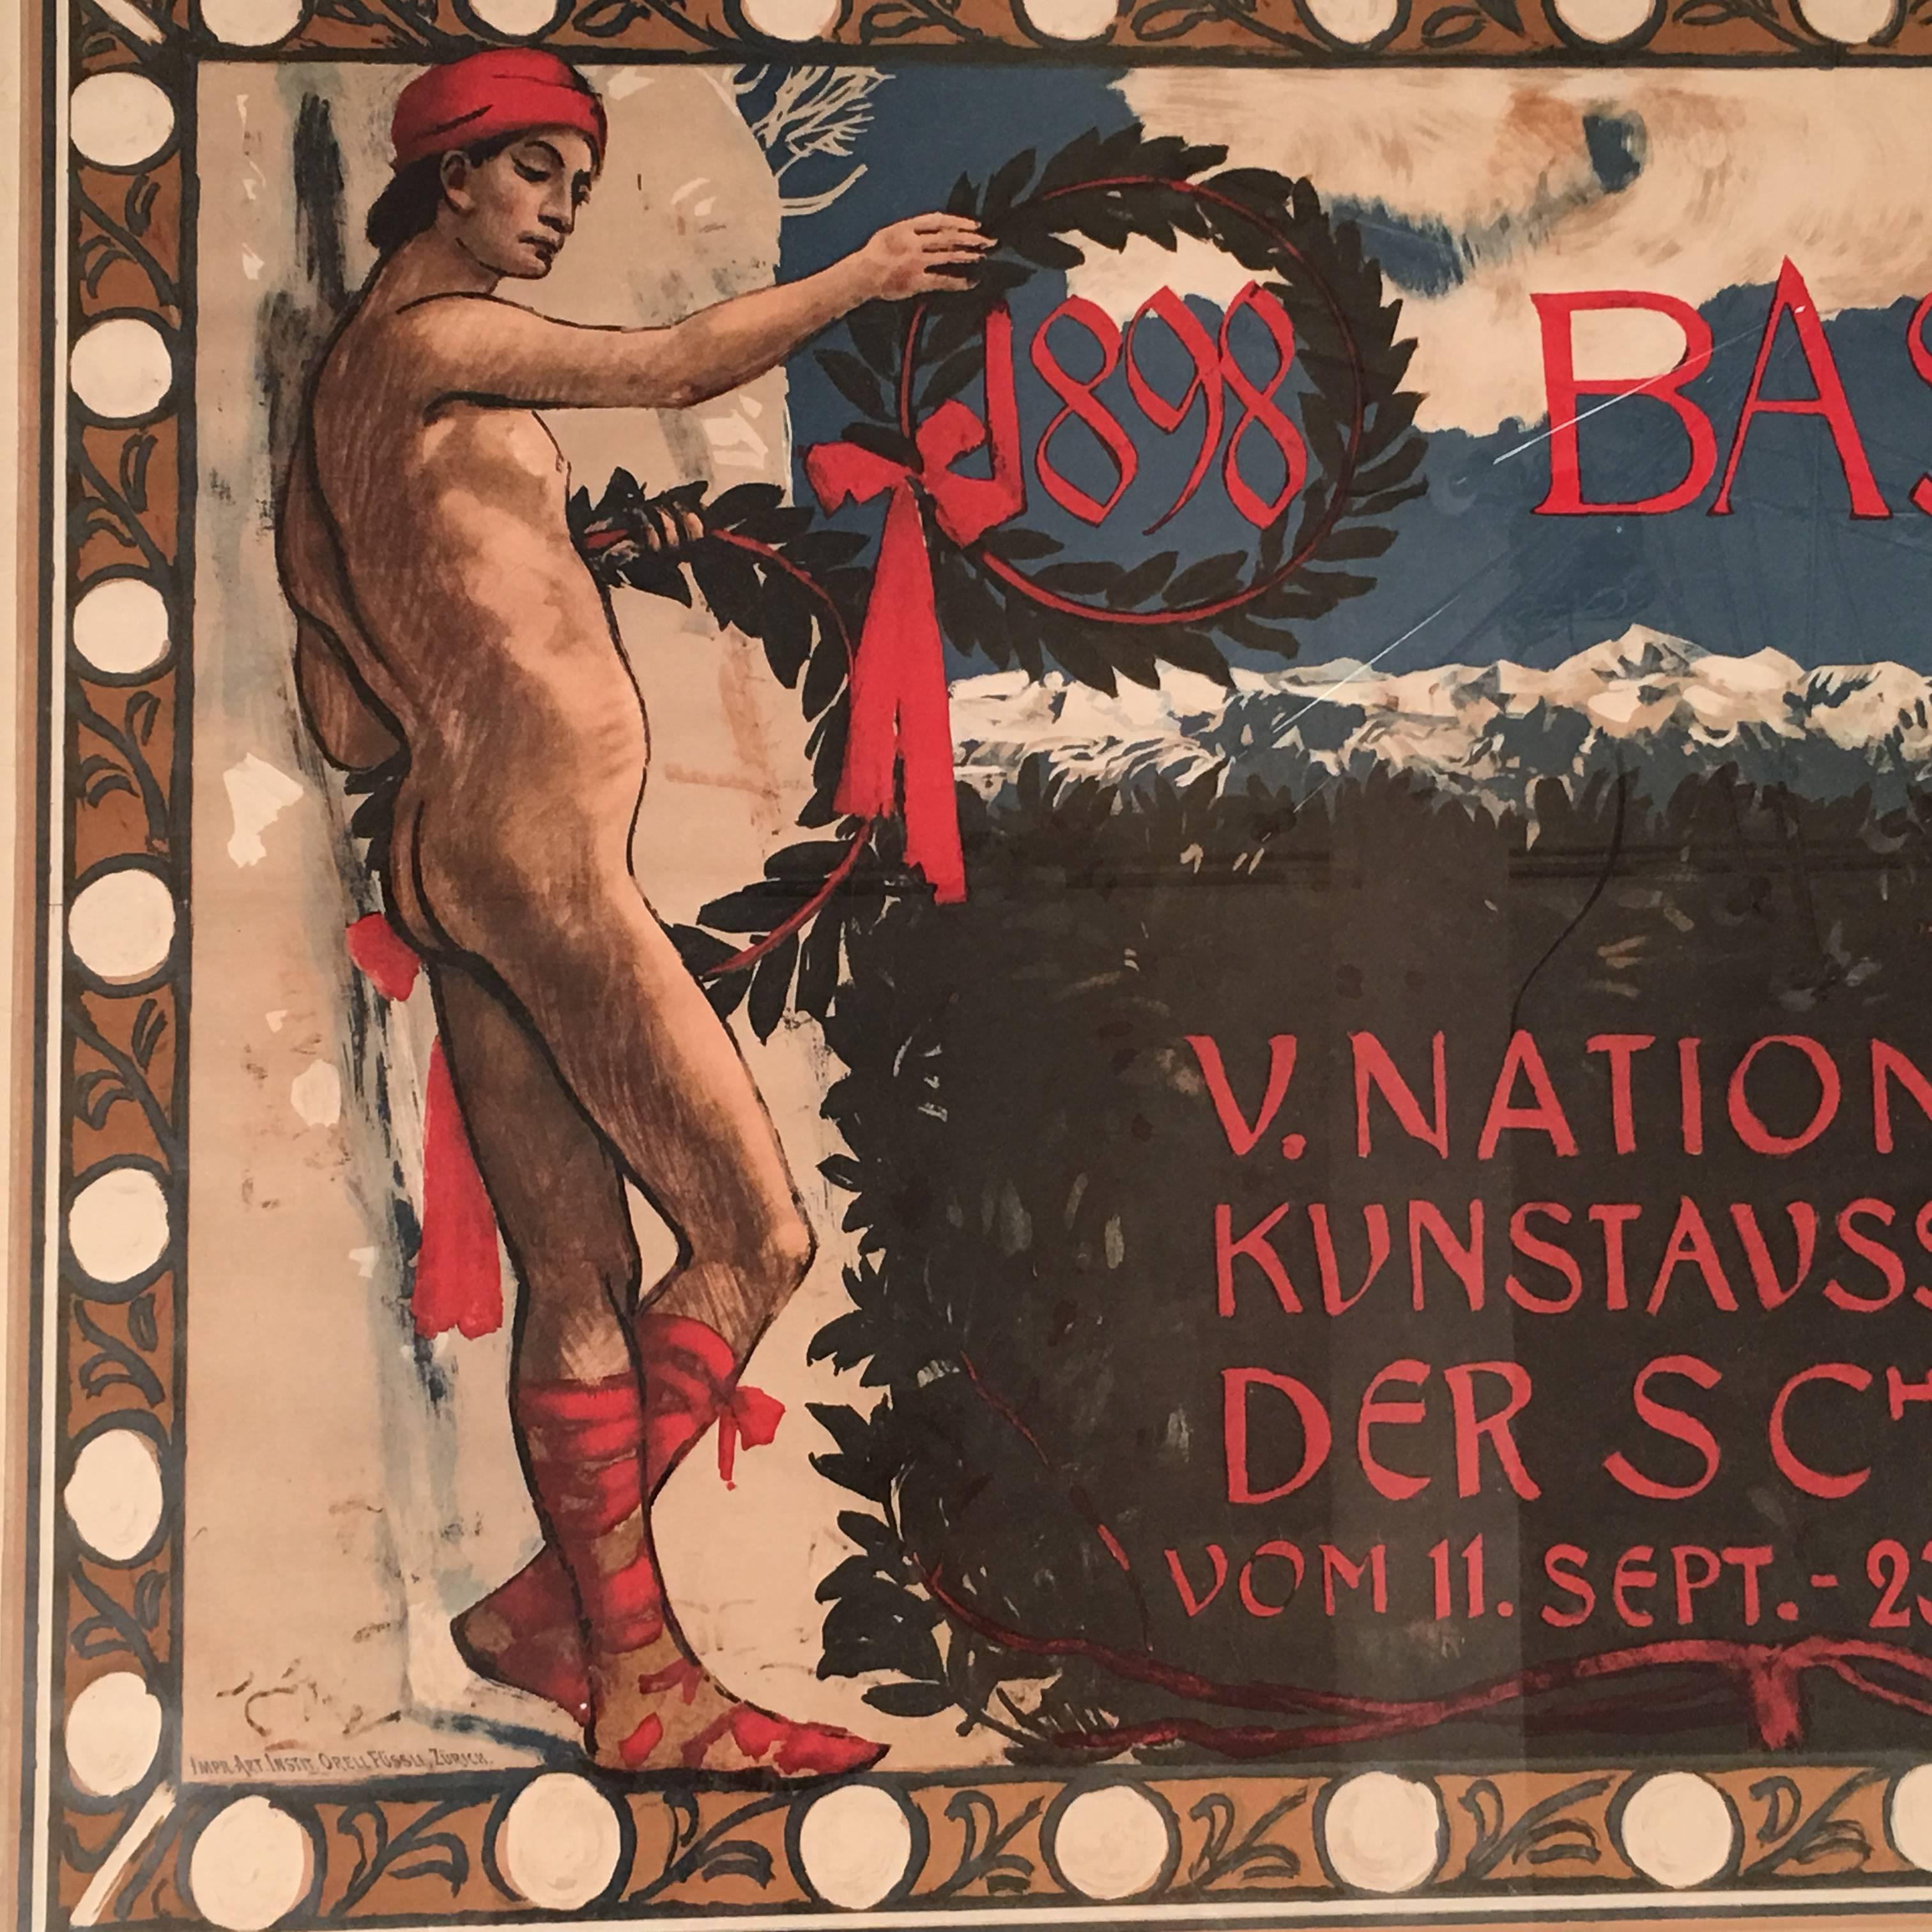 Painted Swiss National Art Exhibition Poster by Hans Sandreuter, circa 1898